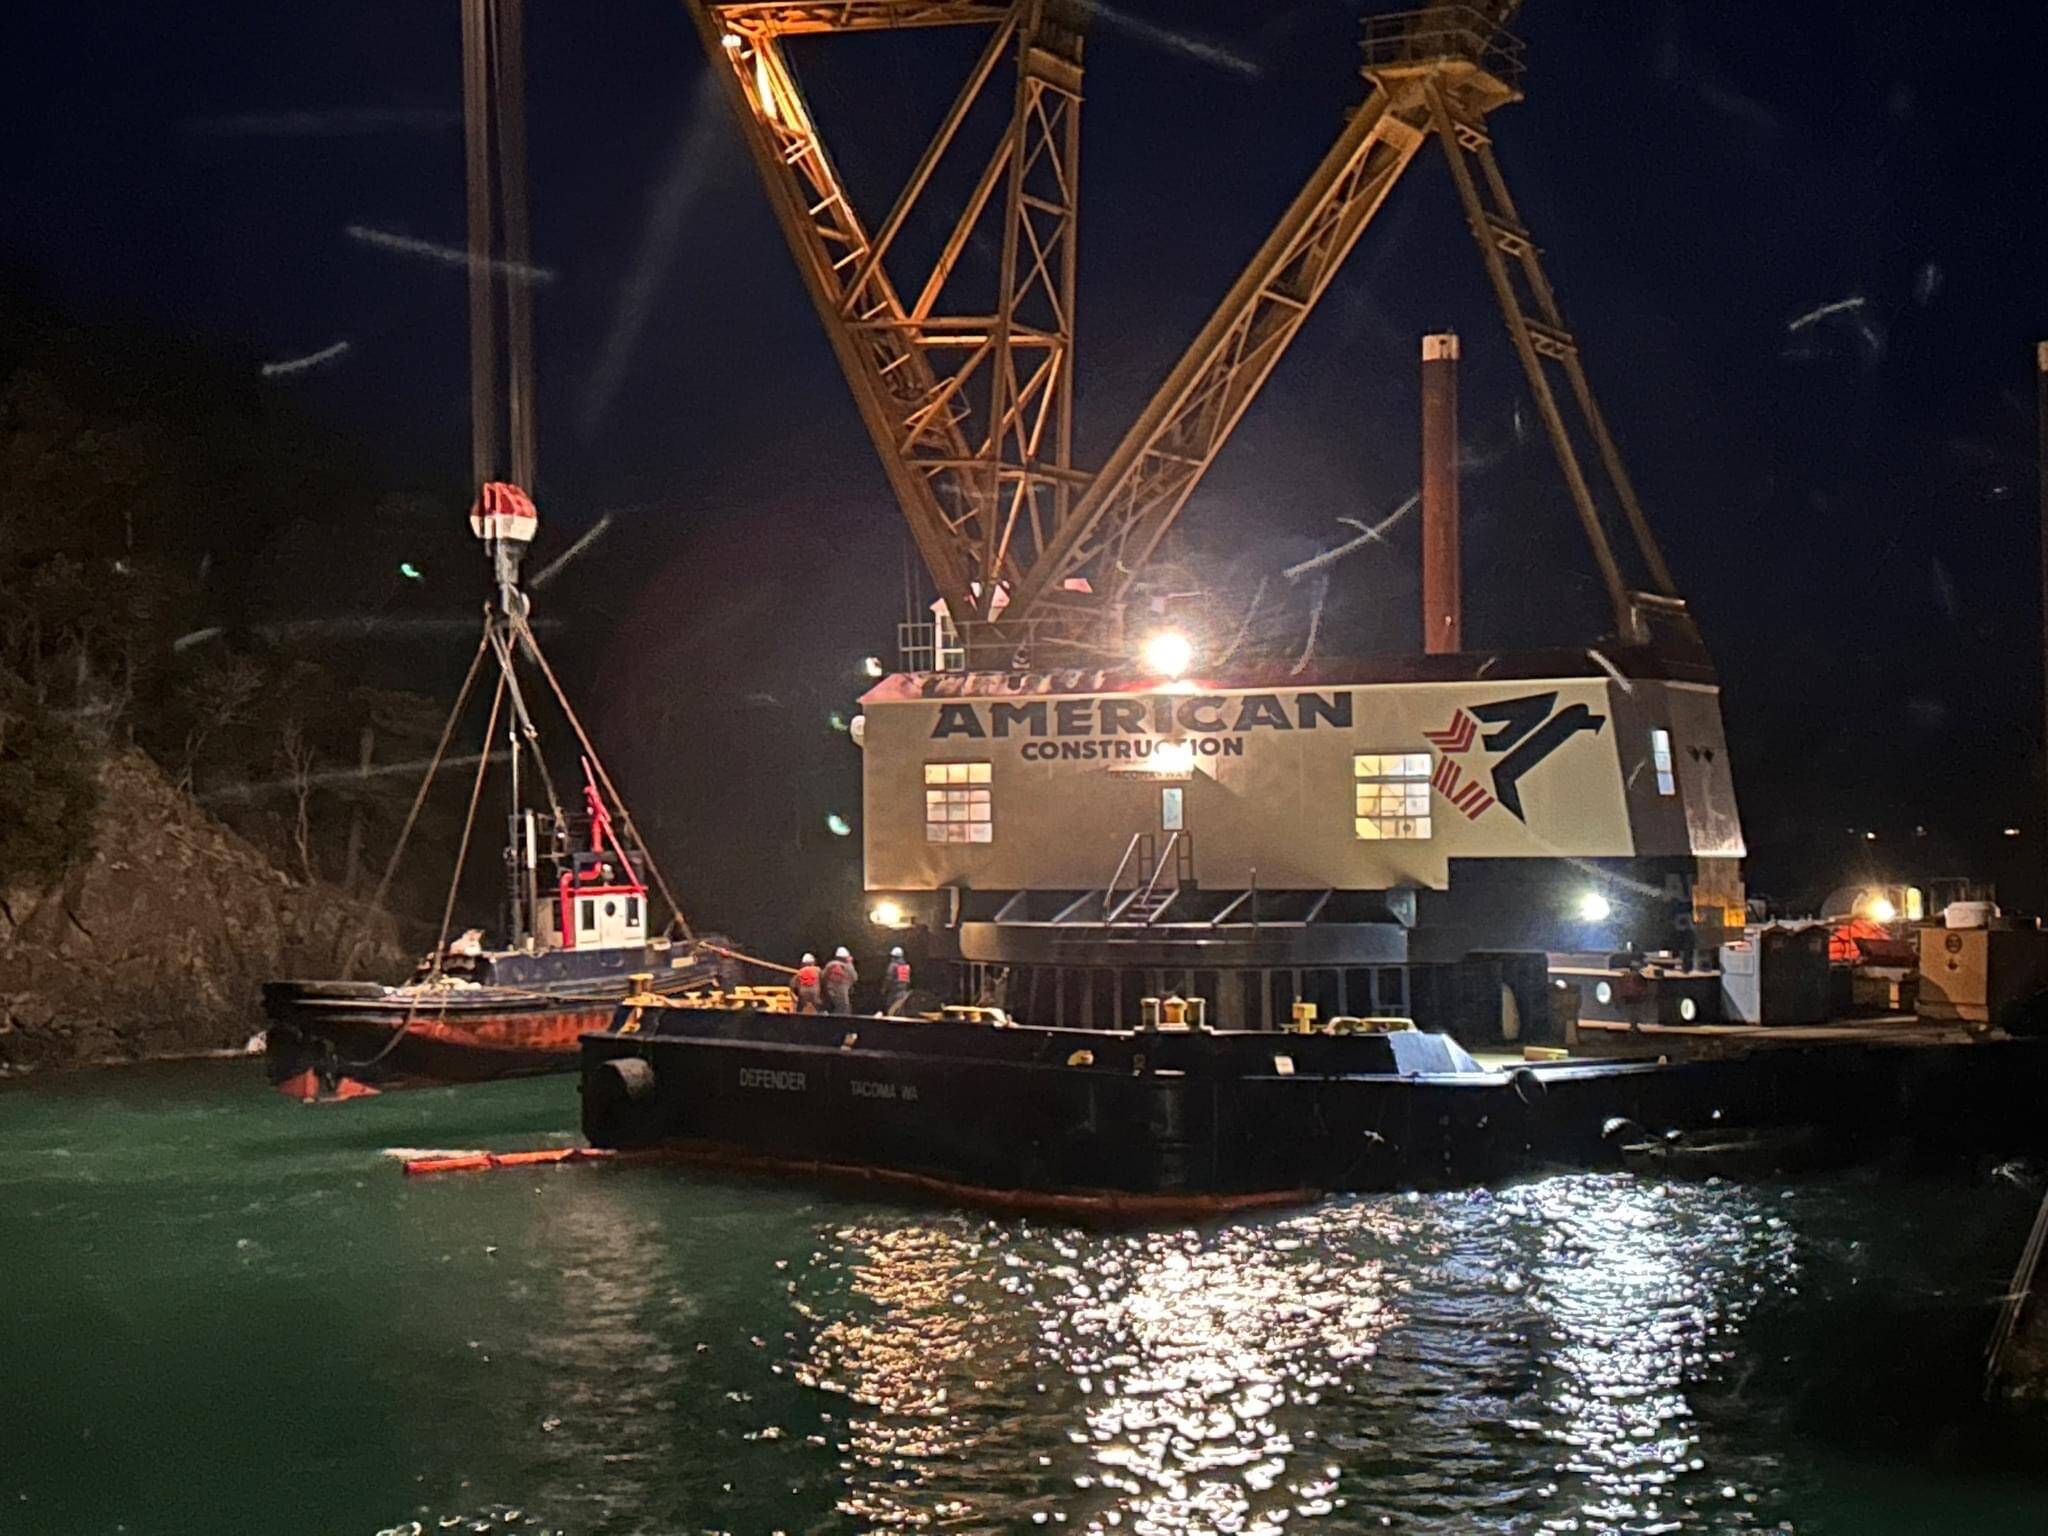 Contributed photo.
The partially submerged Tugboat Tulalip is successfully lifted from the waters near the Lopez ferry terminal Wednesday night.